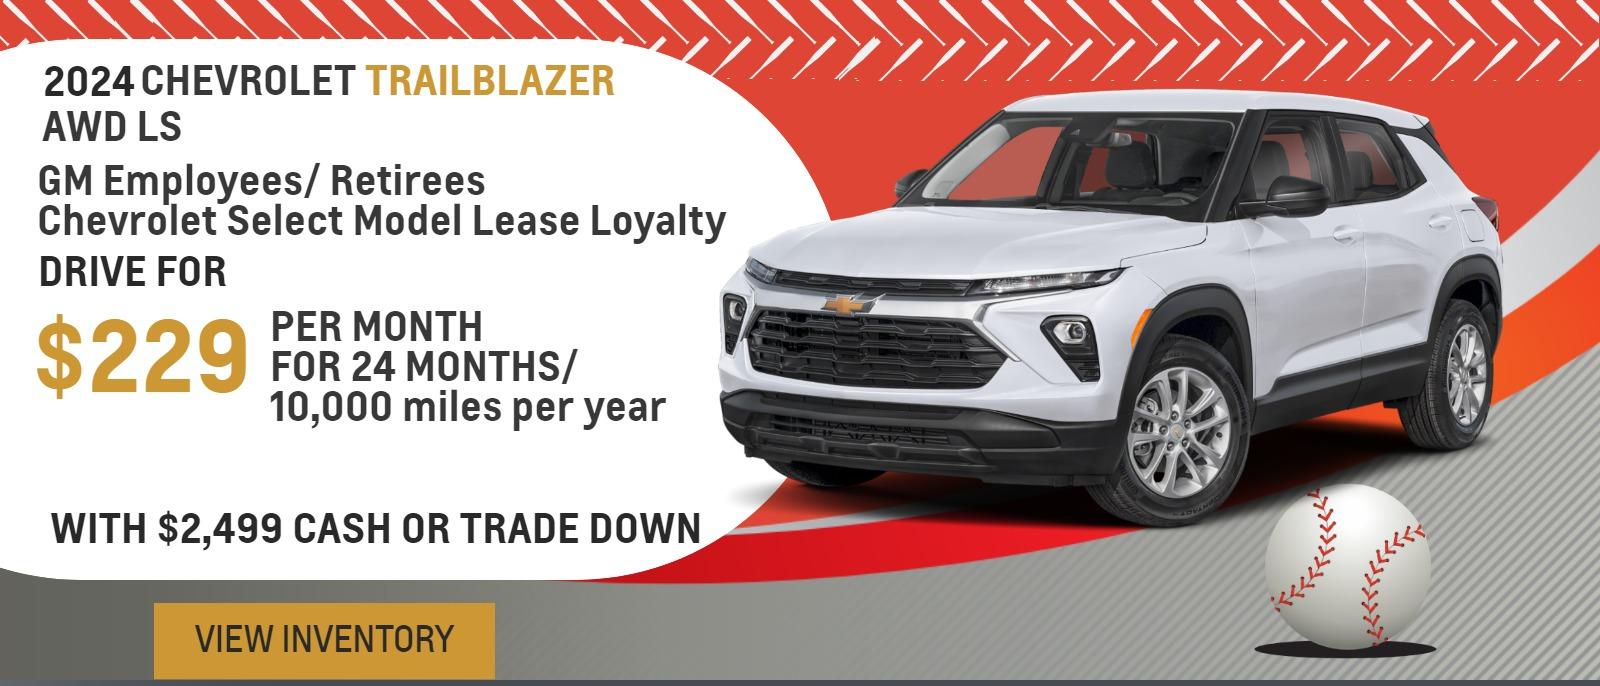 2024 Trailblazer AWD LS
GM Employees/ Retirees
Chevrolet Select Model Lease Loyalty

Drive for $229 per month
24 Months / 10,000 miles per year
With $2,499 cash or trade down